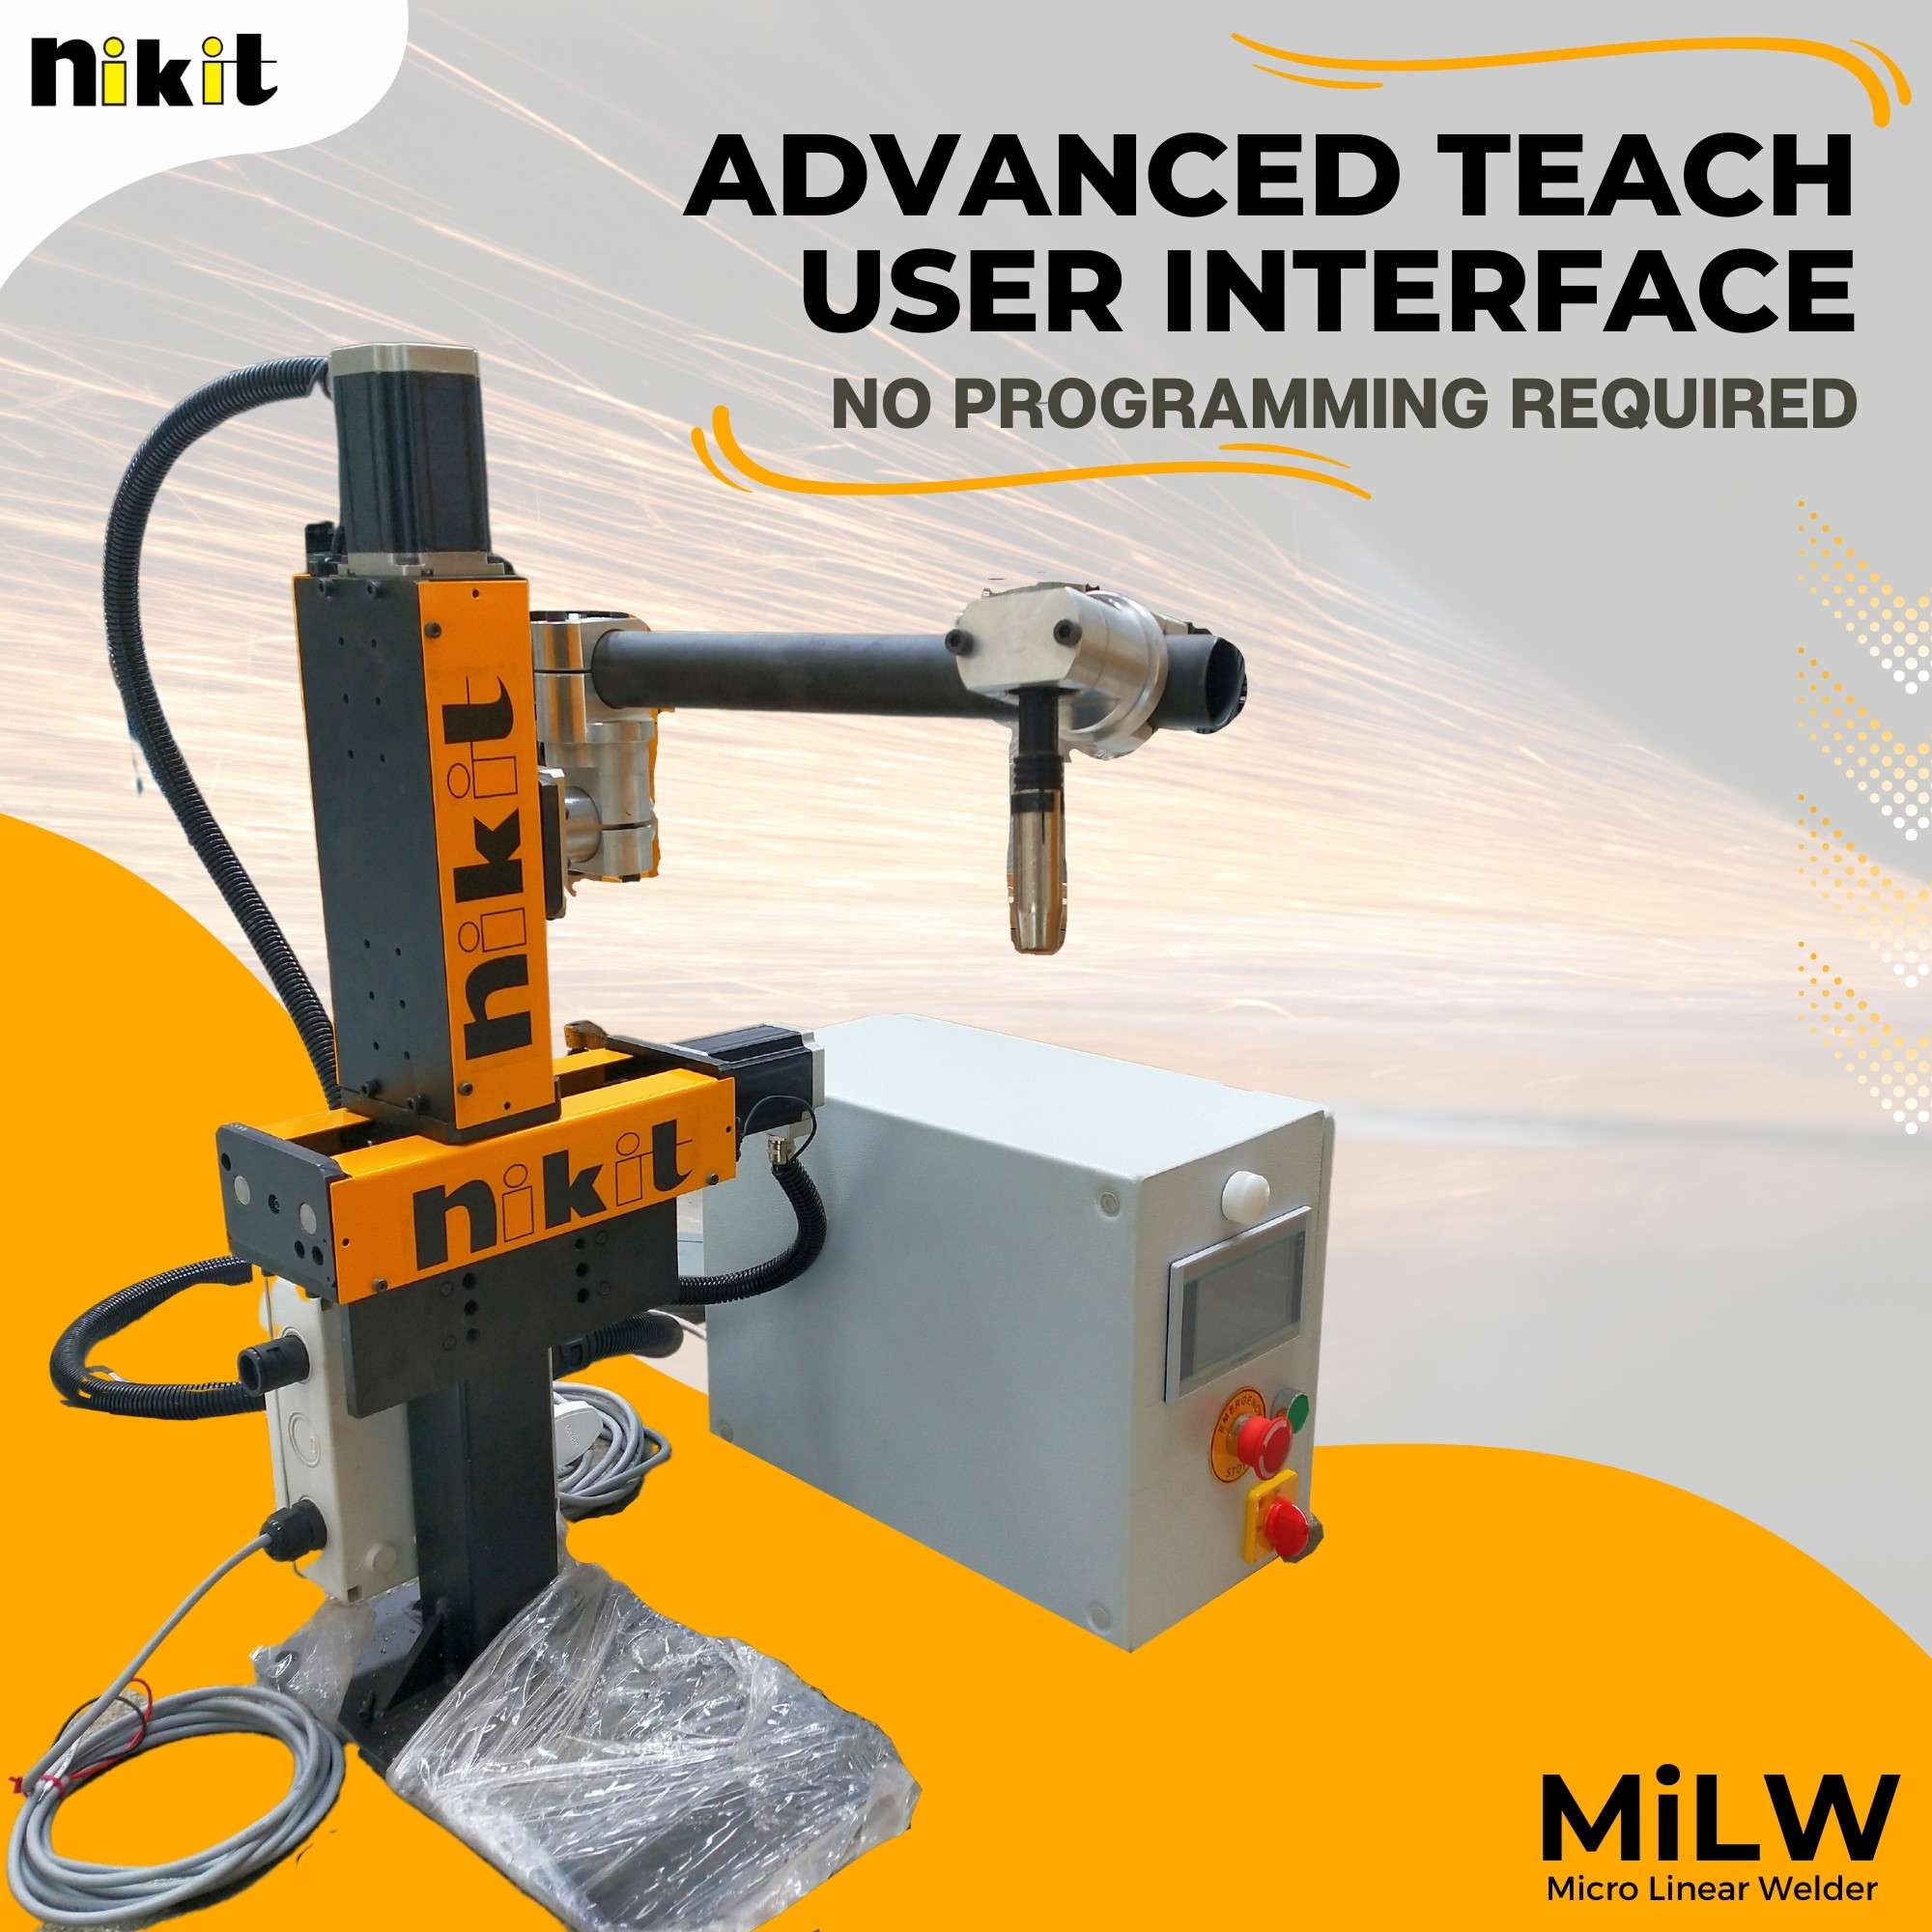 nikti-engineers-welding-automation-micro-linear-welder-welding-product-india-milw-advanced-teach-user-iterface